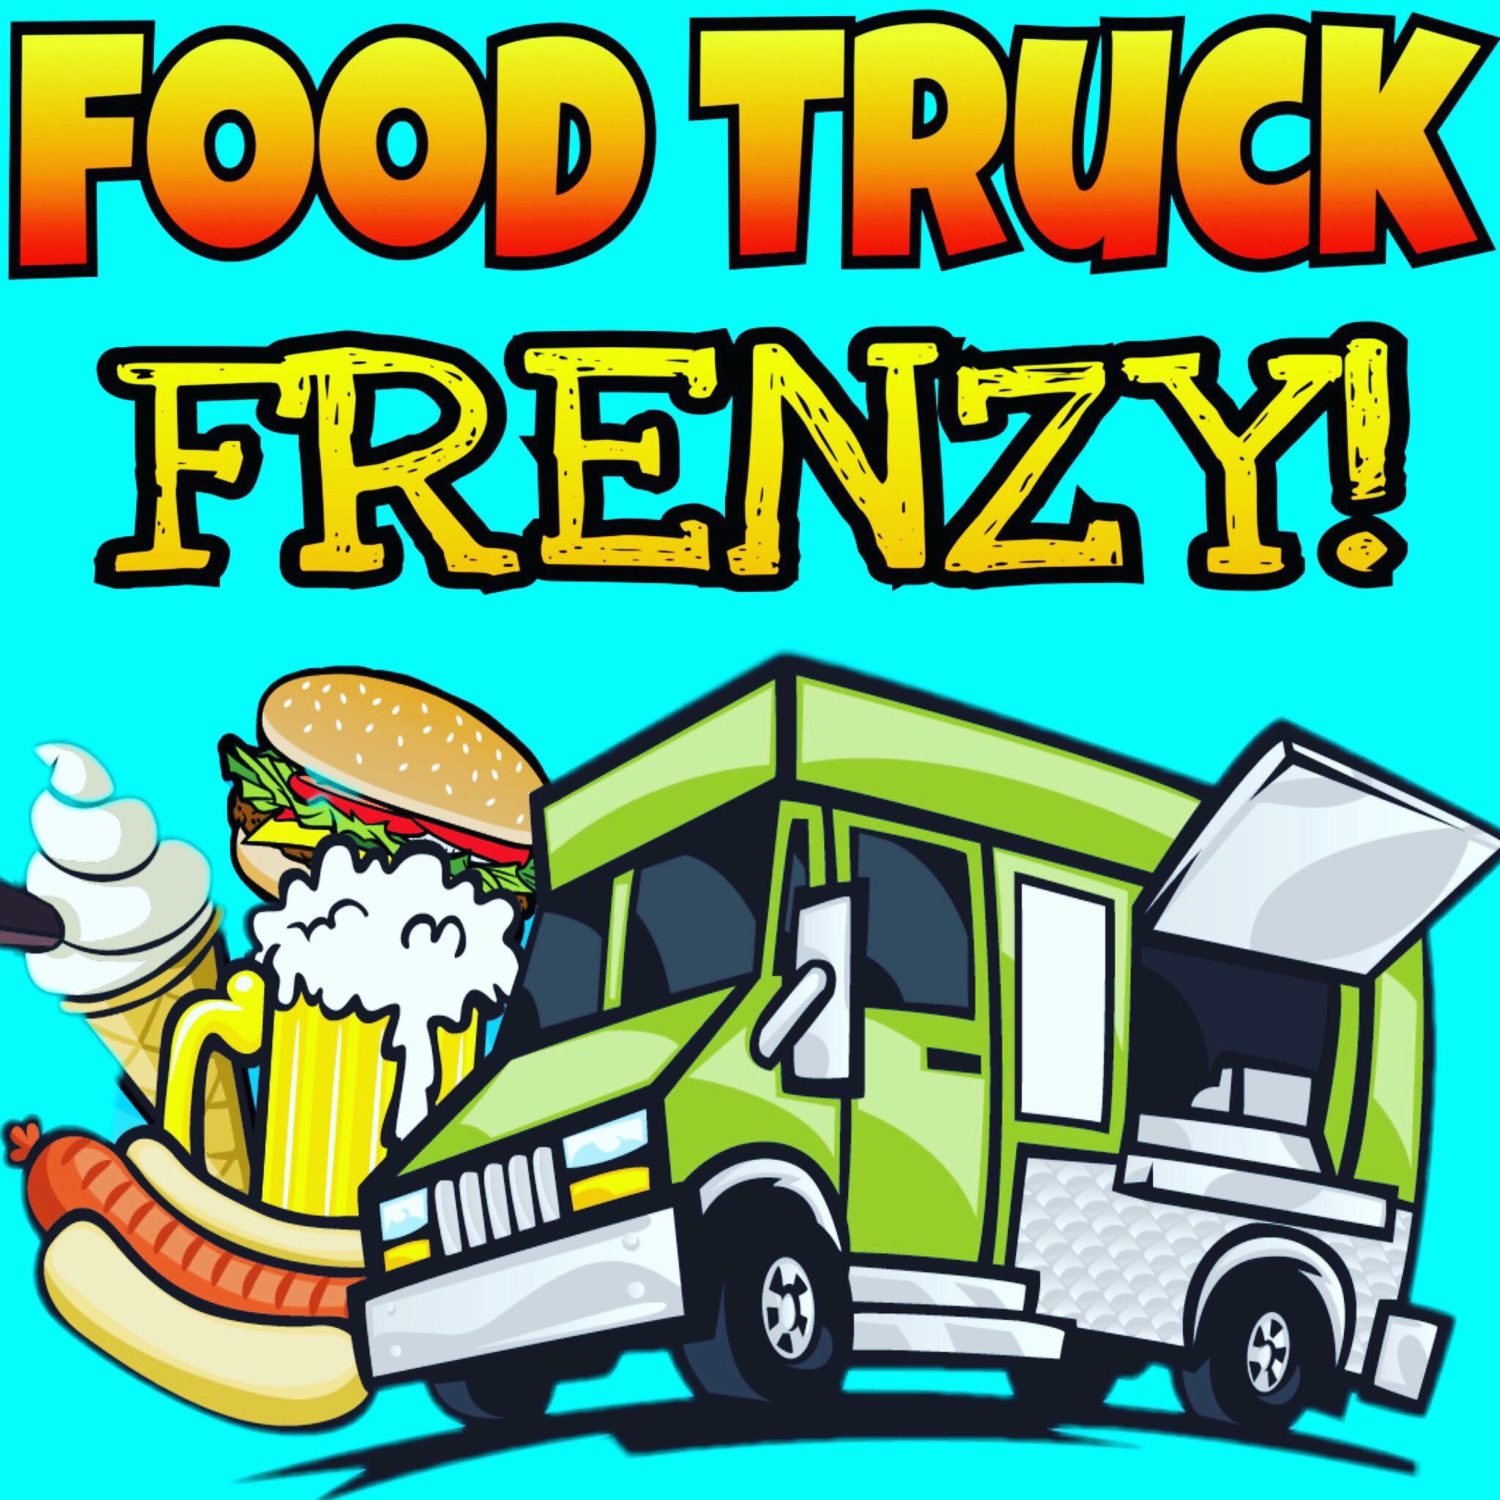 Park Place Infiniti will host a weekly Food Truck Frenzy event on Fridays throughout May and June from 5 p.m. to 9 p.m.